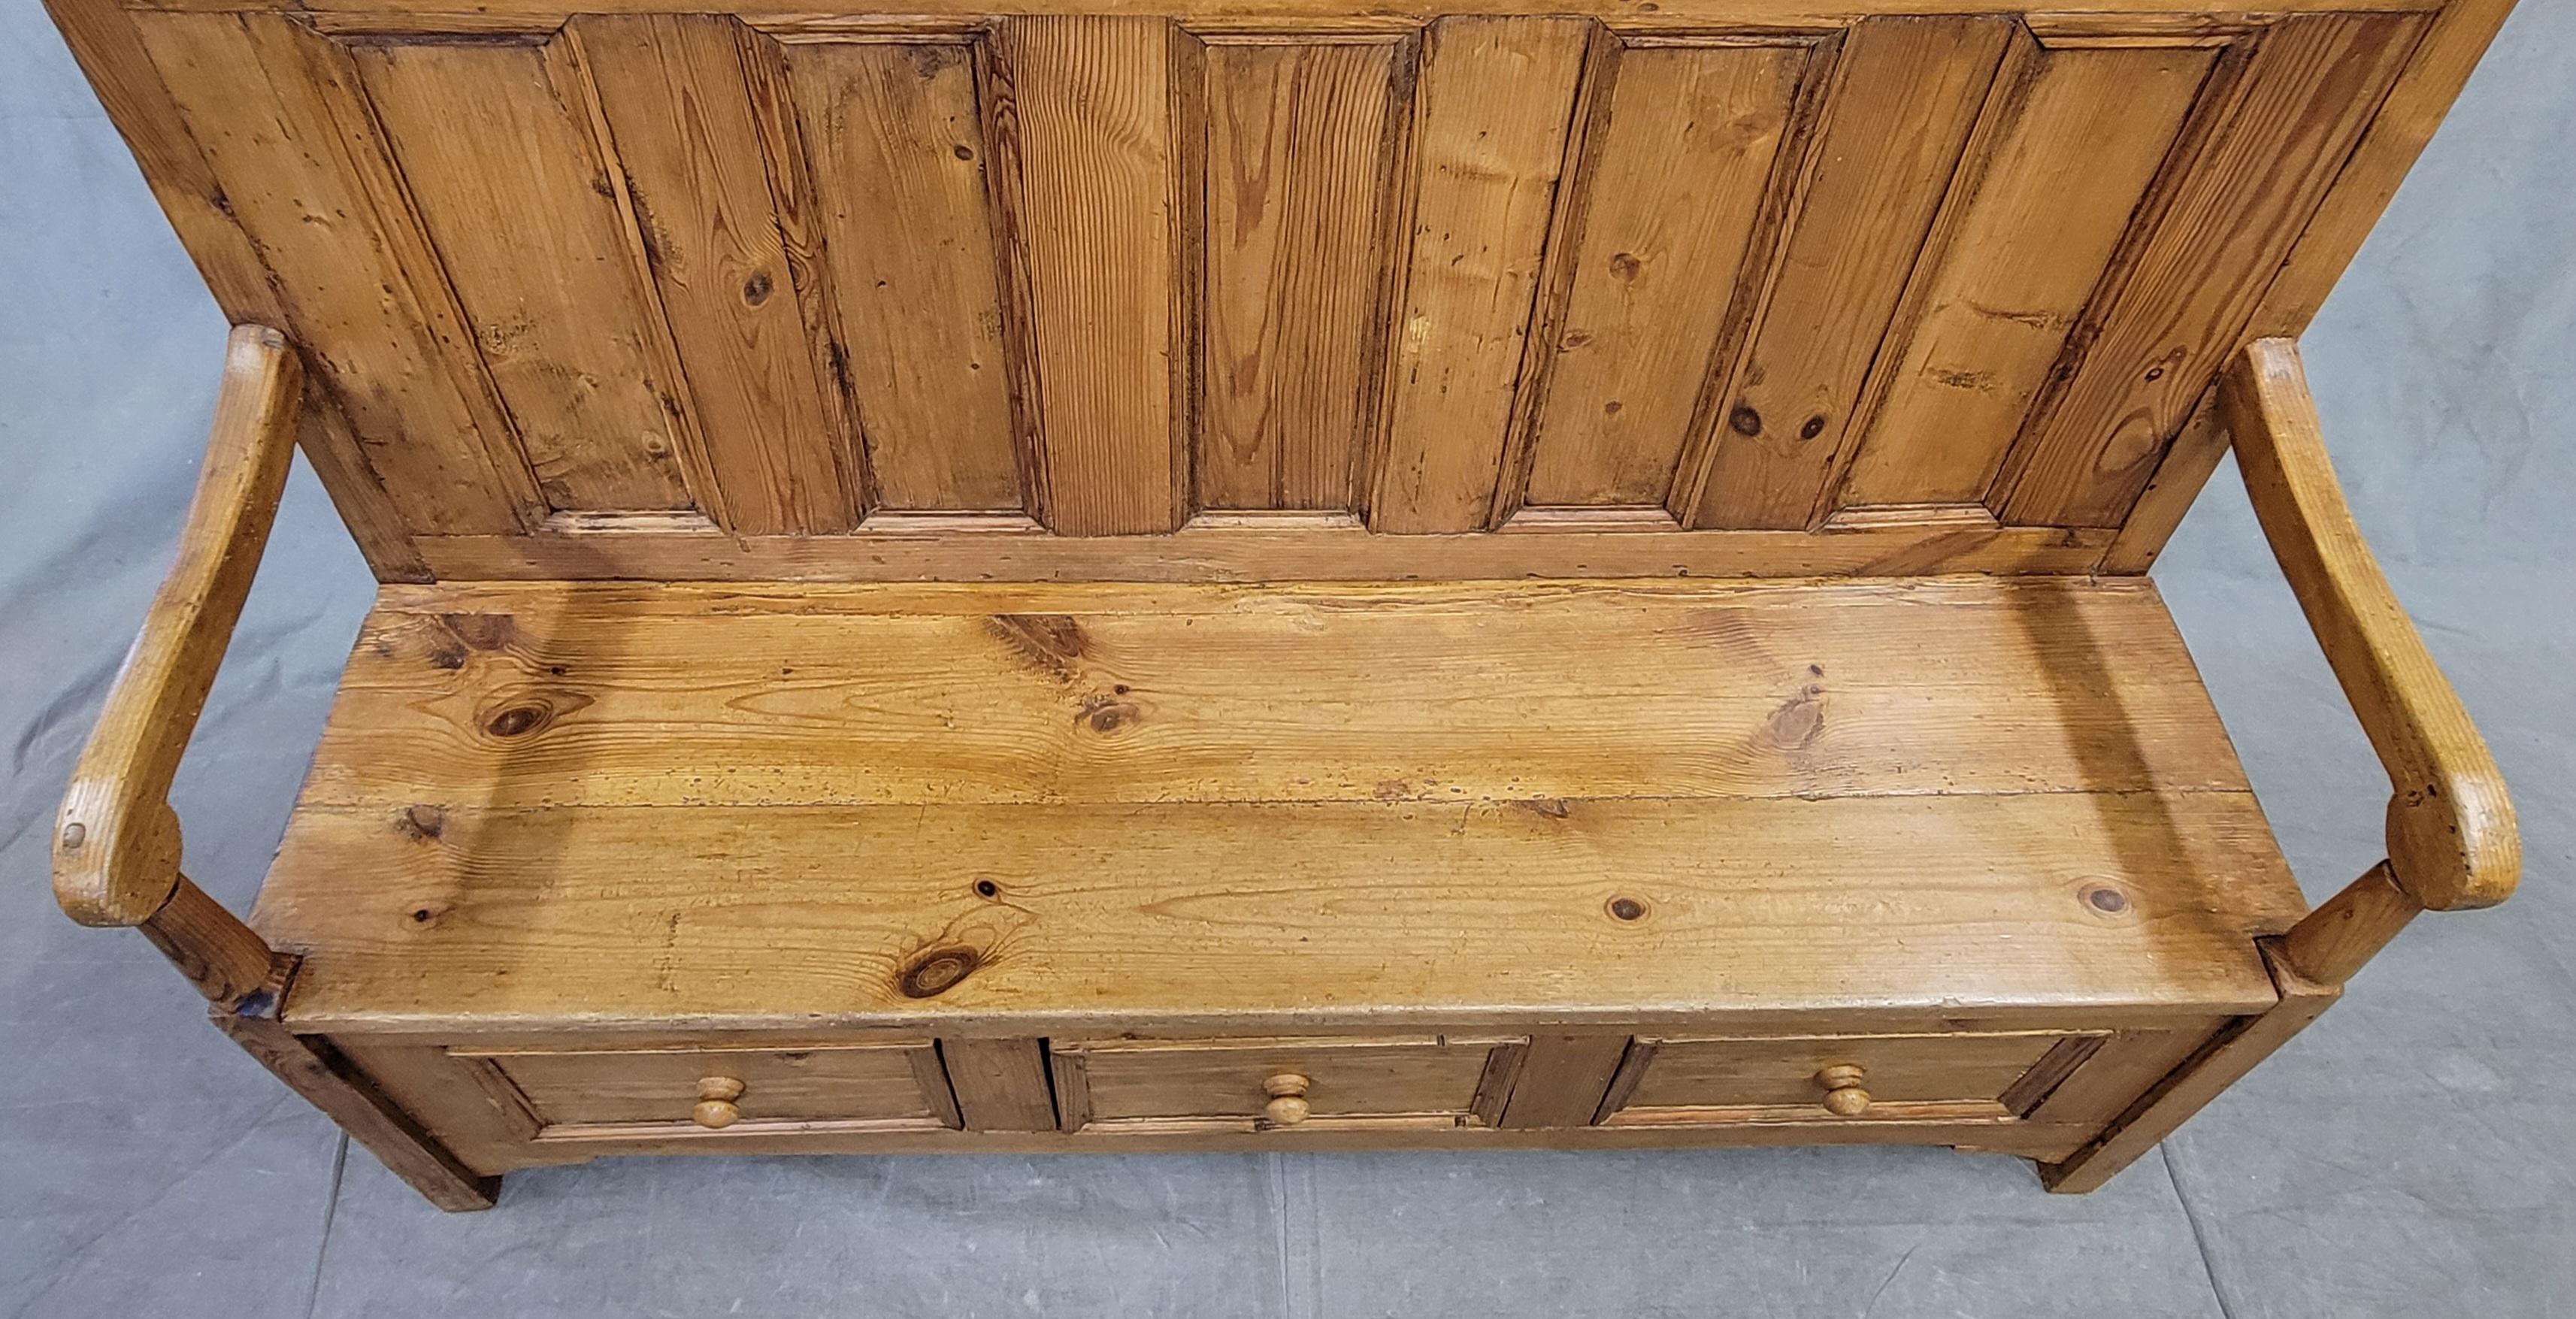 Hand-Crafted Eastern European Rustic Pine Settle Bench